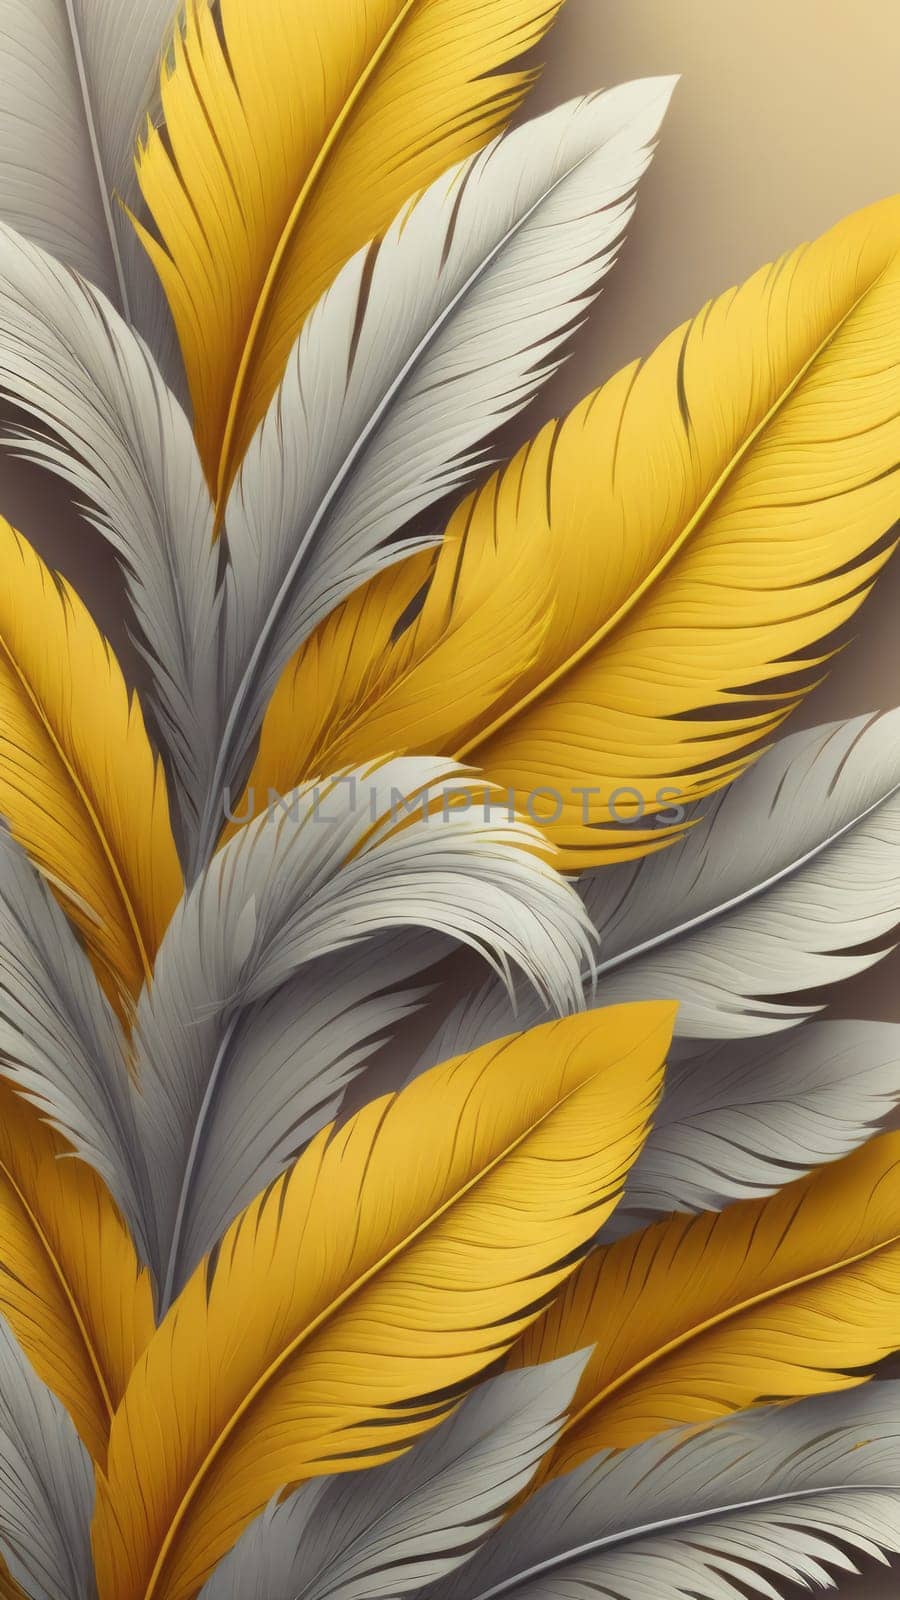 Screen background from Feathered shapes and yellow by nkotlyar